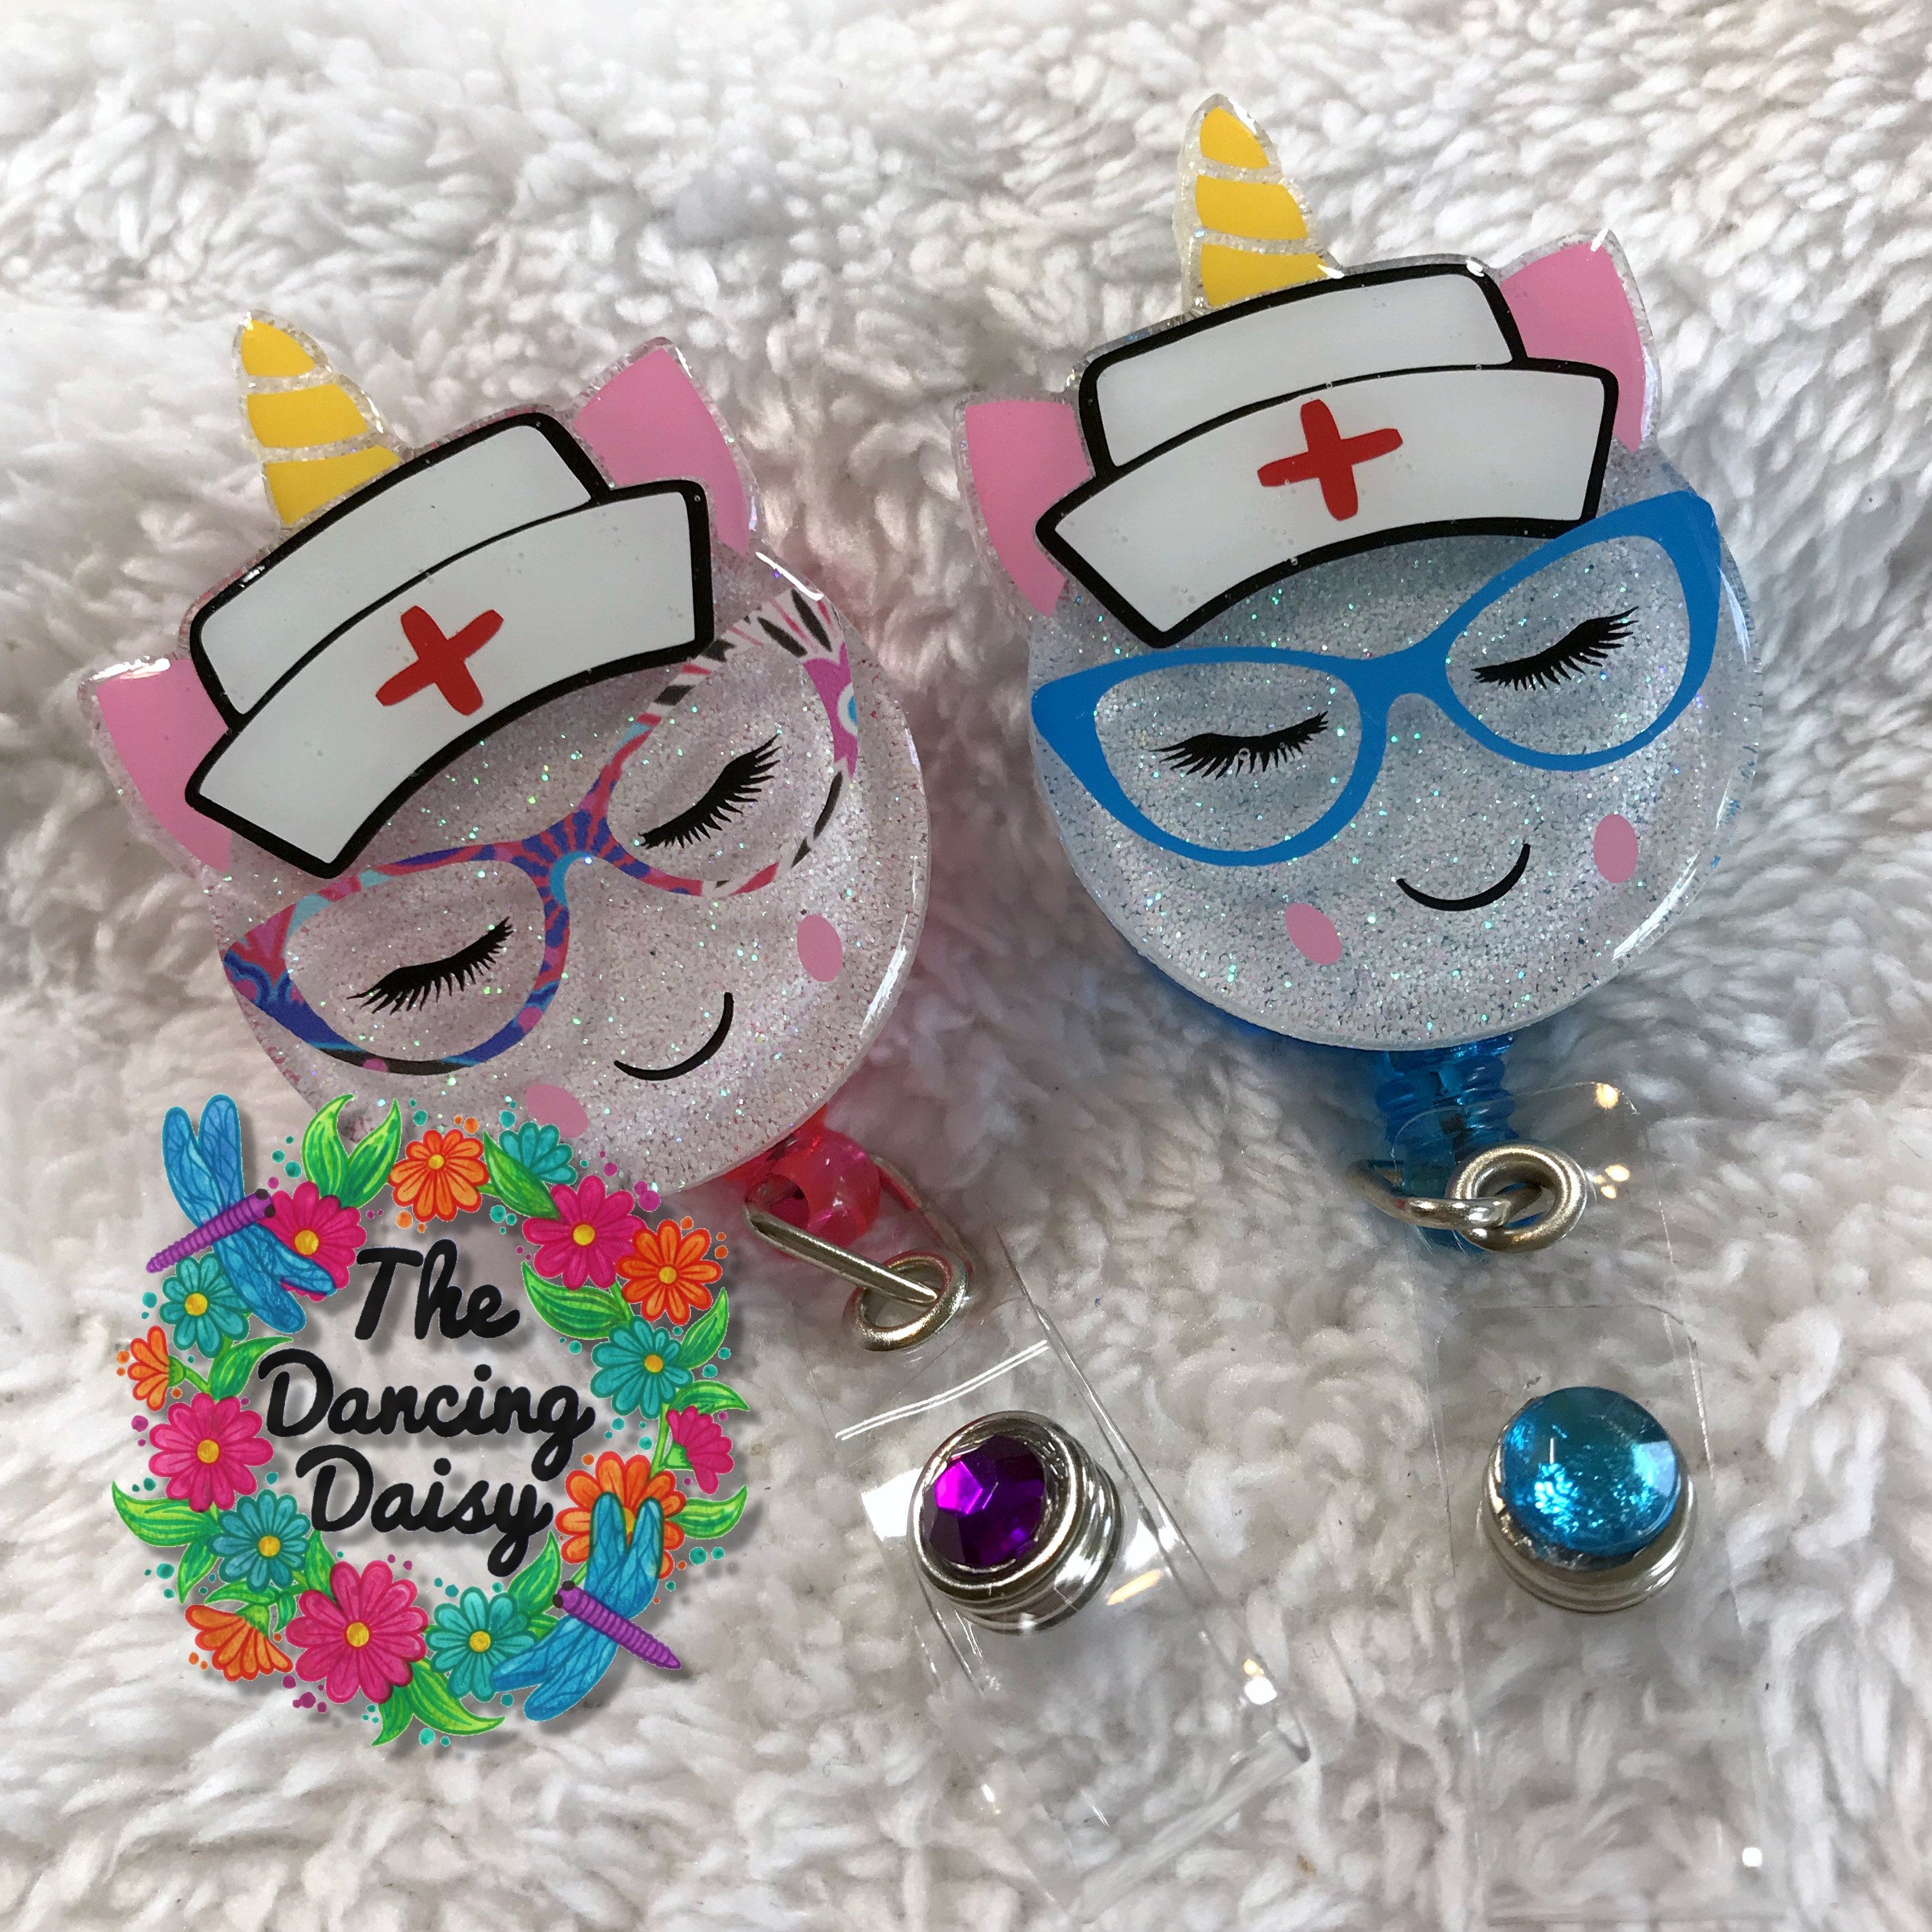 Funny Nurse Acrylic and Decal Blanks to Make Badge Reels, Acrylic Blanks,  Badge Reel Supplies, Clear Cast Acrylic, General Anesthesia